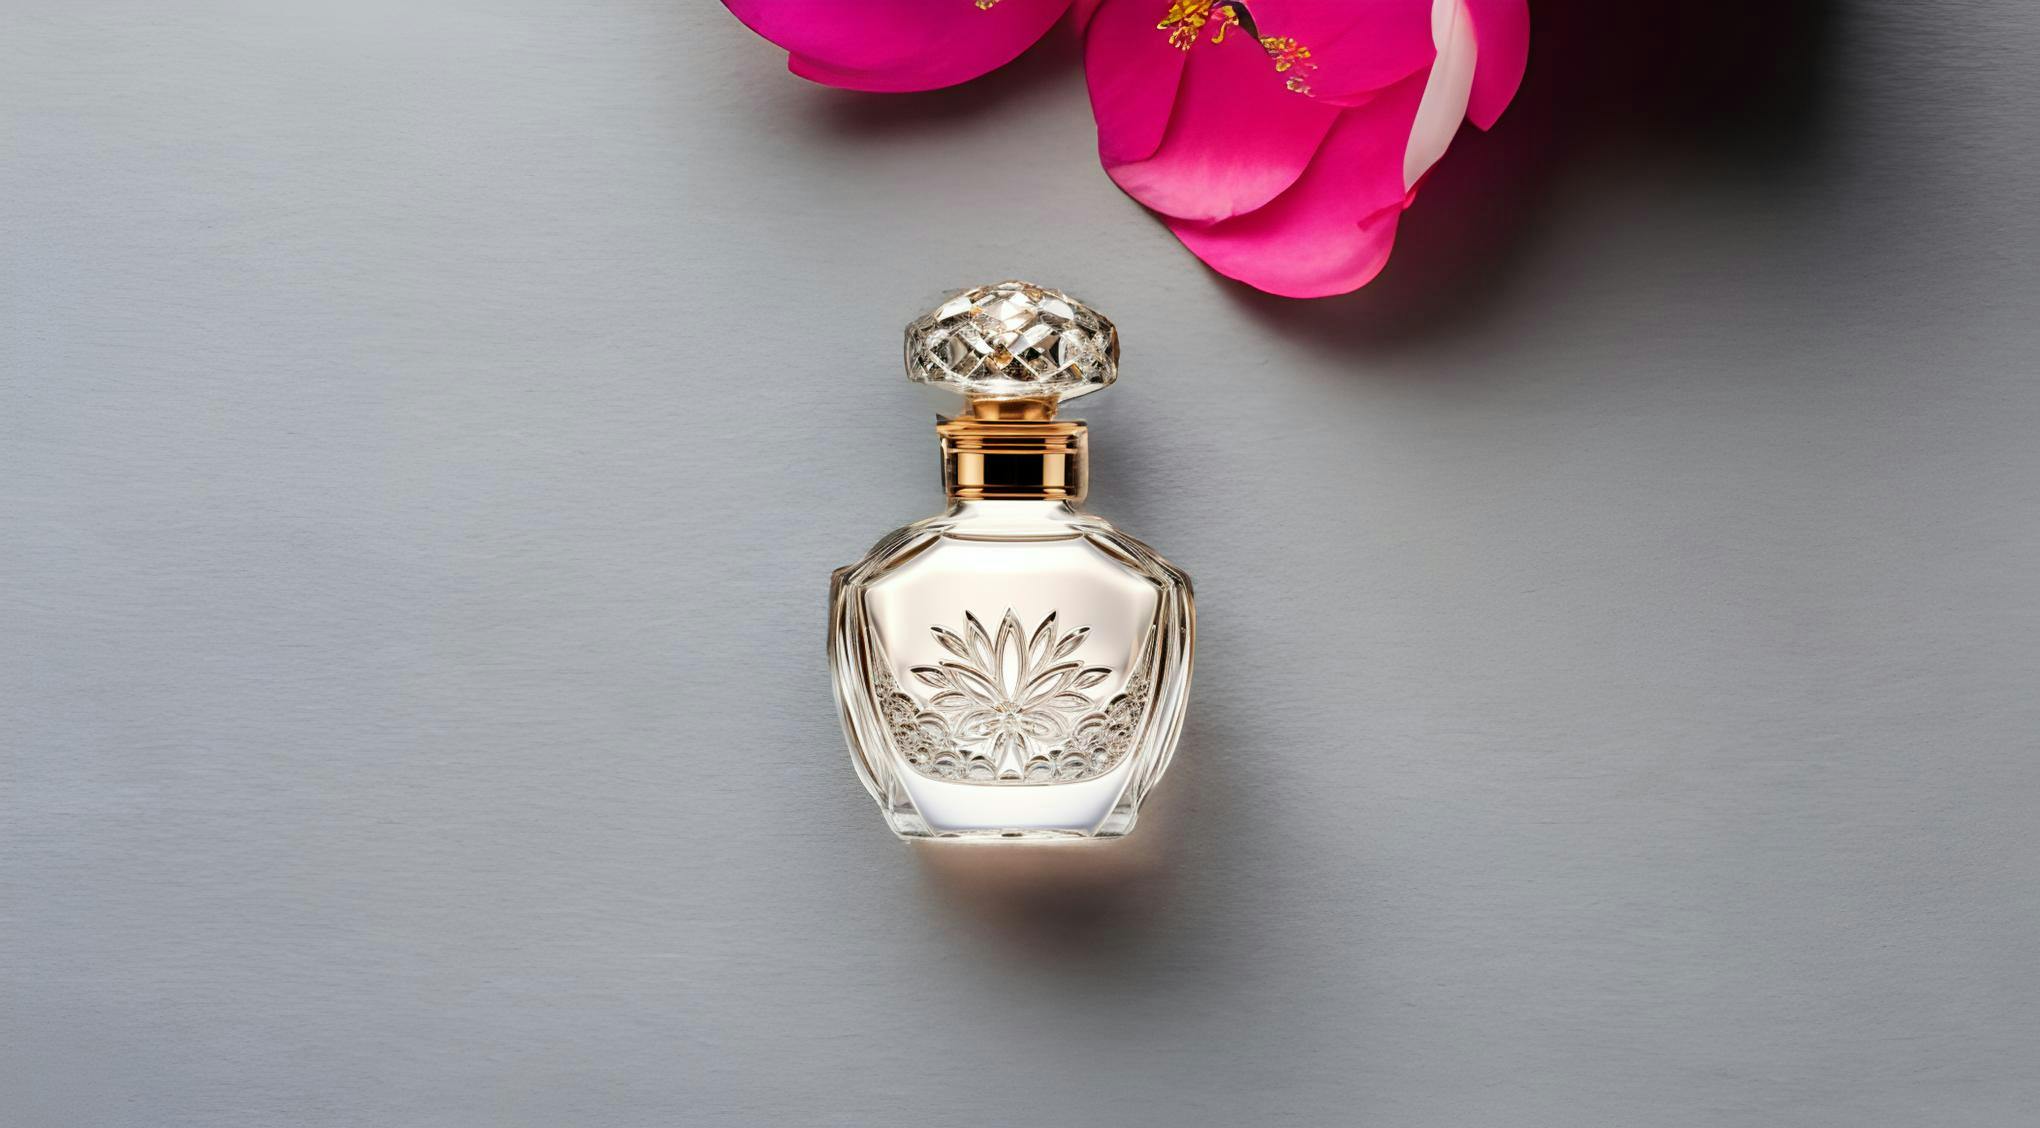 Eye-level product photography of a perfume bottle with pink and gold flowers. Shot on 120mm with a Hasselblad camera.